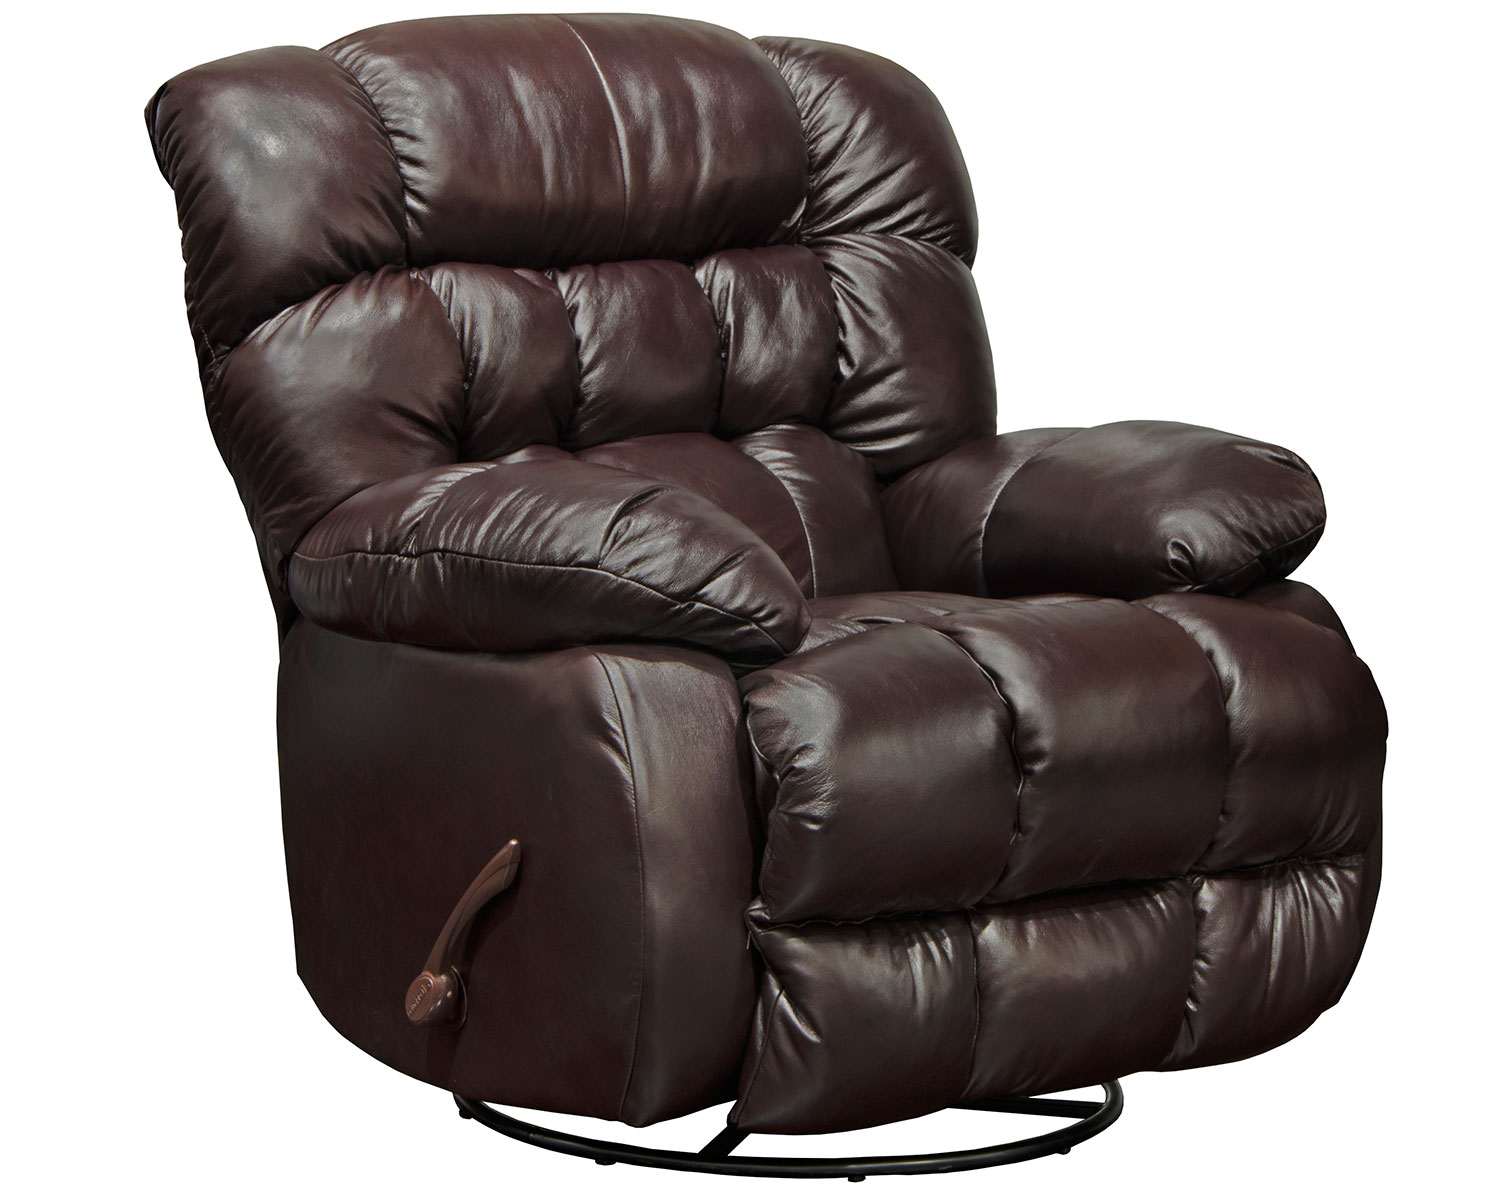 CatNapper Pendleton Leather Recliner Chair - Chocolate